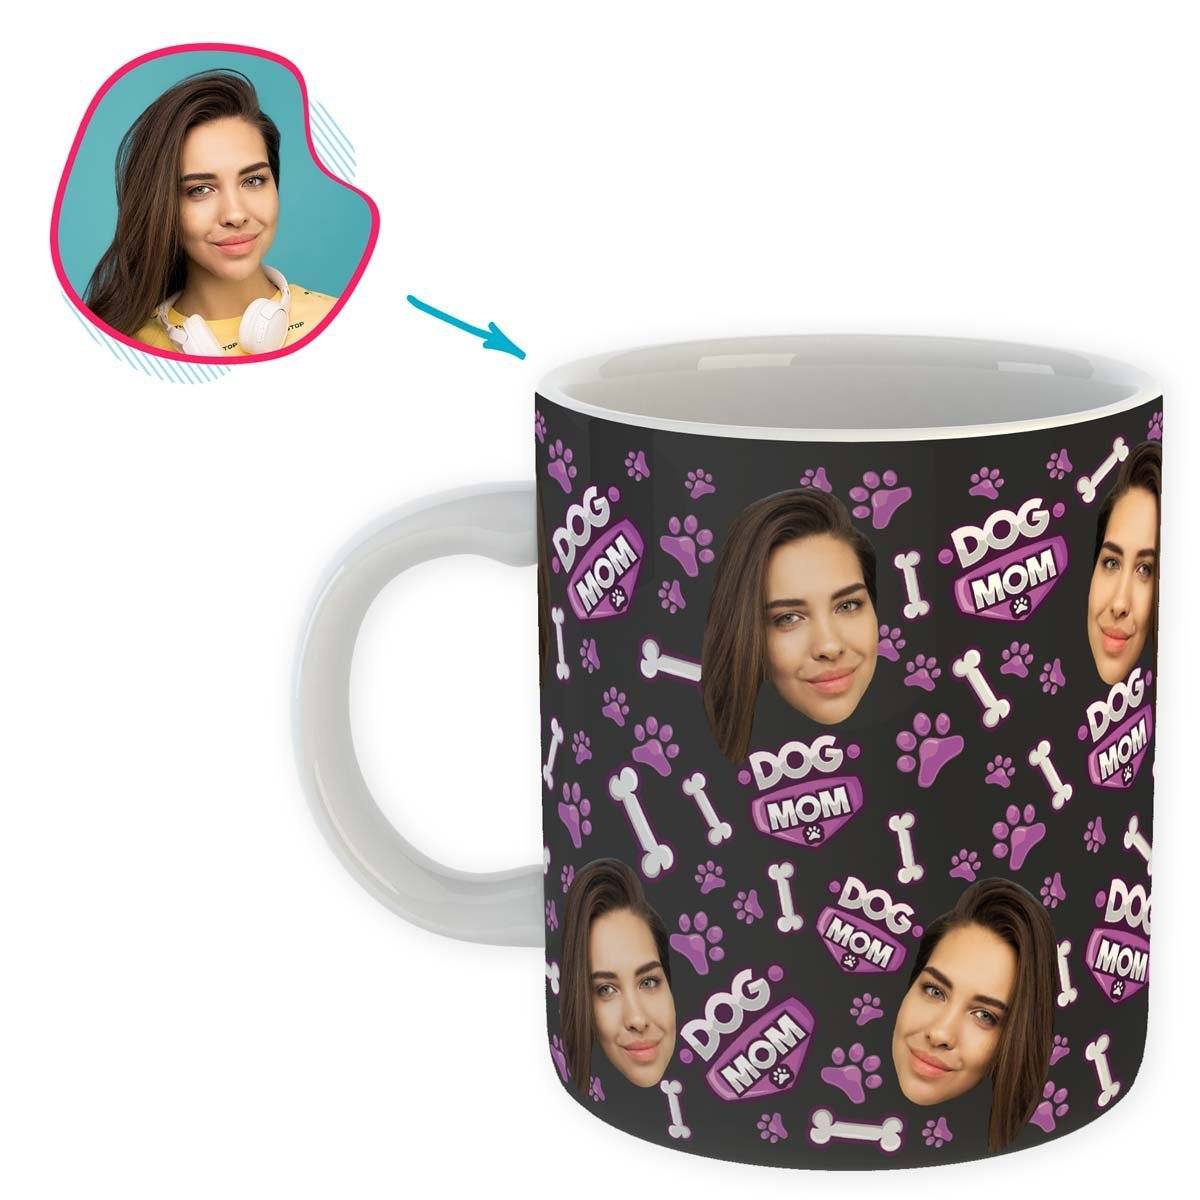 dark Dog Mom mug personalized with photo of face printed on it